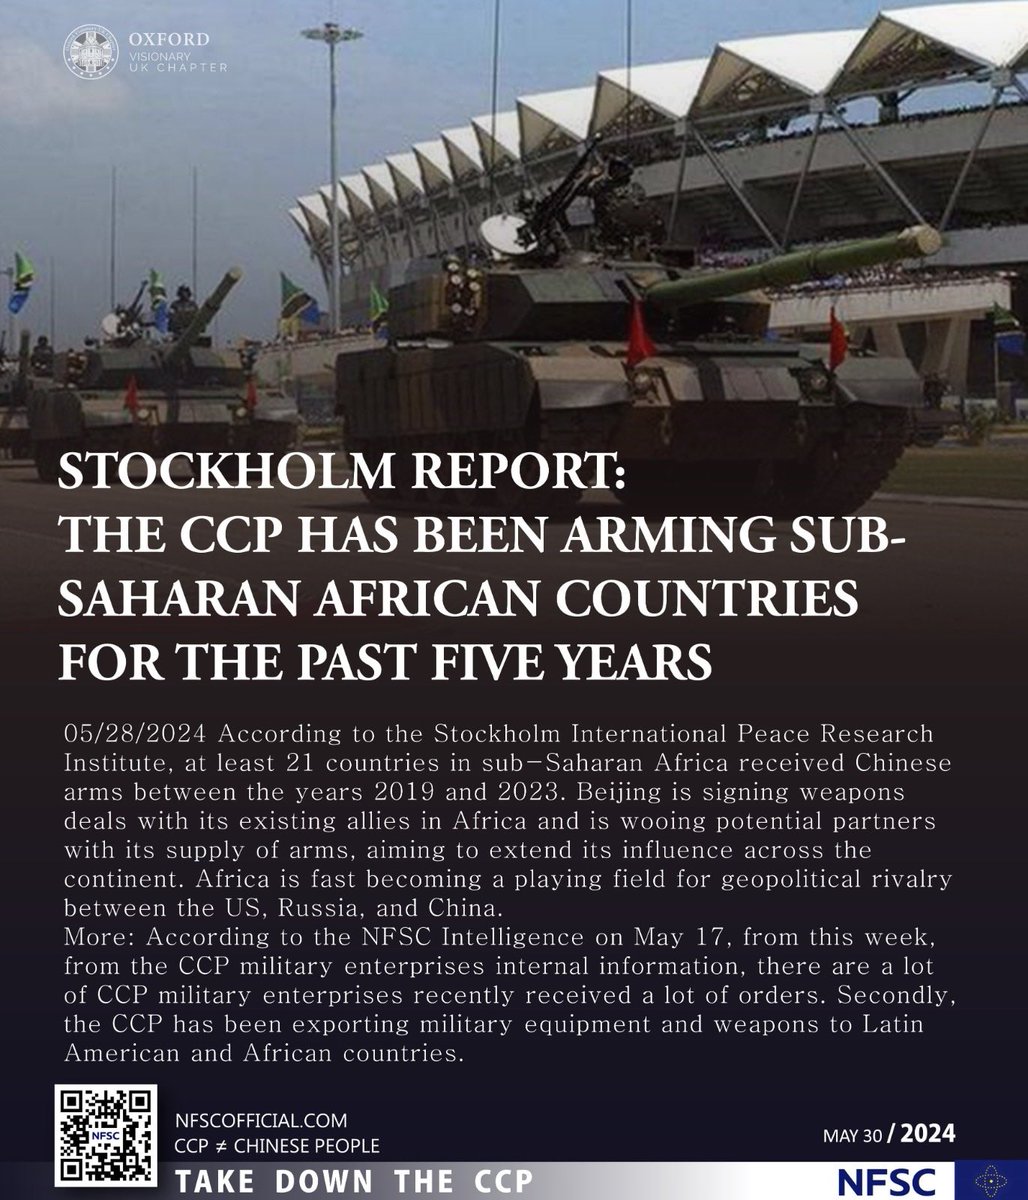 Stockholm Report: The CCP has been arming sub-Saharan African countries for the past five years
05/28/2024 According to the #Stockholm International Peace Research Institute, at least 21 countries in sub-Saharan Africa received Chinese arms between the years 2019 and 2023…….